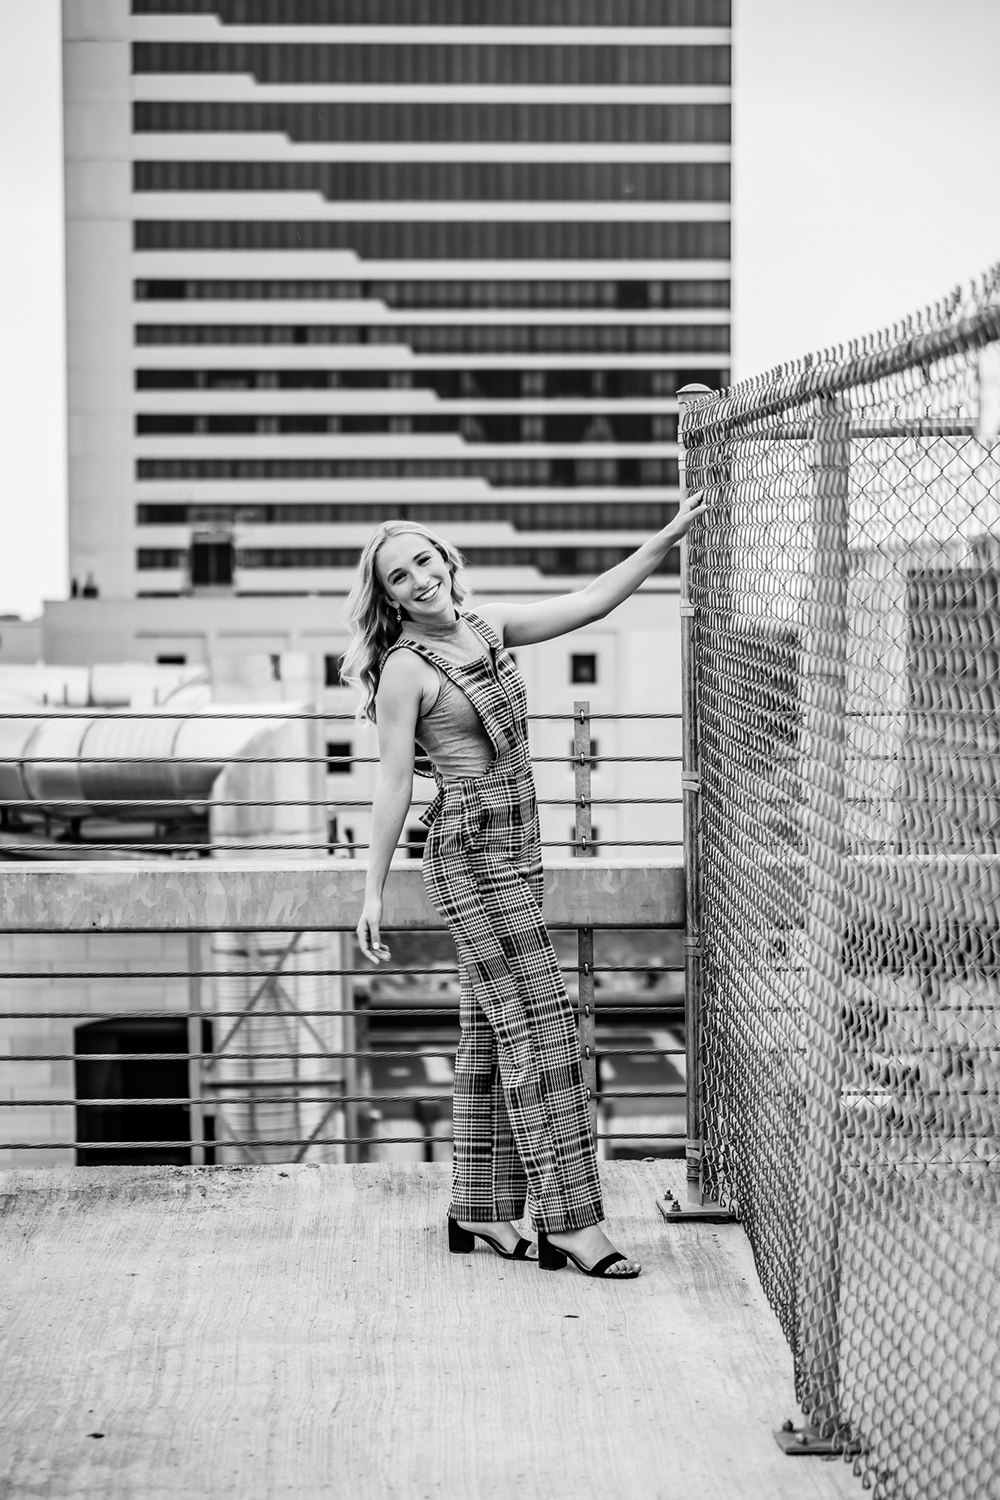 teenage girl posing on a rooftop holding onto a wire fence with city skyline in the background